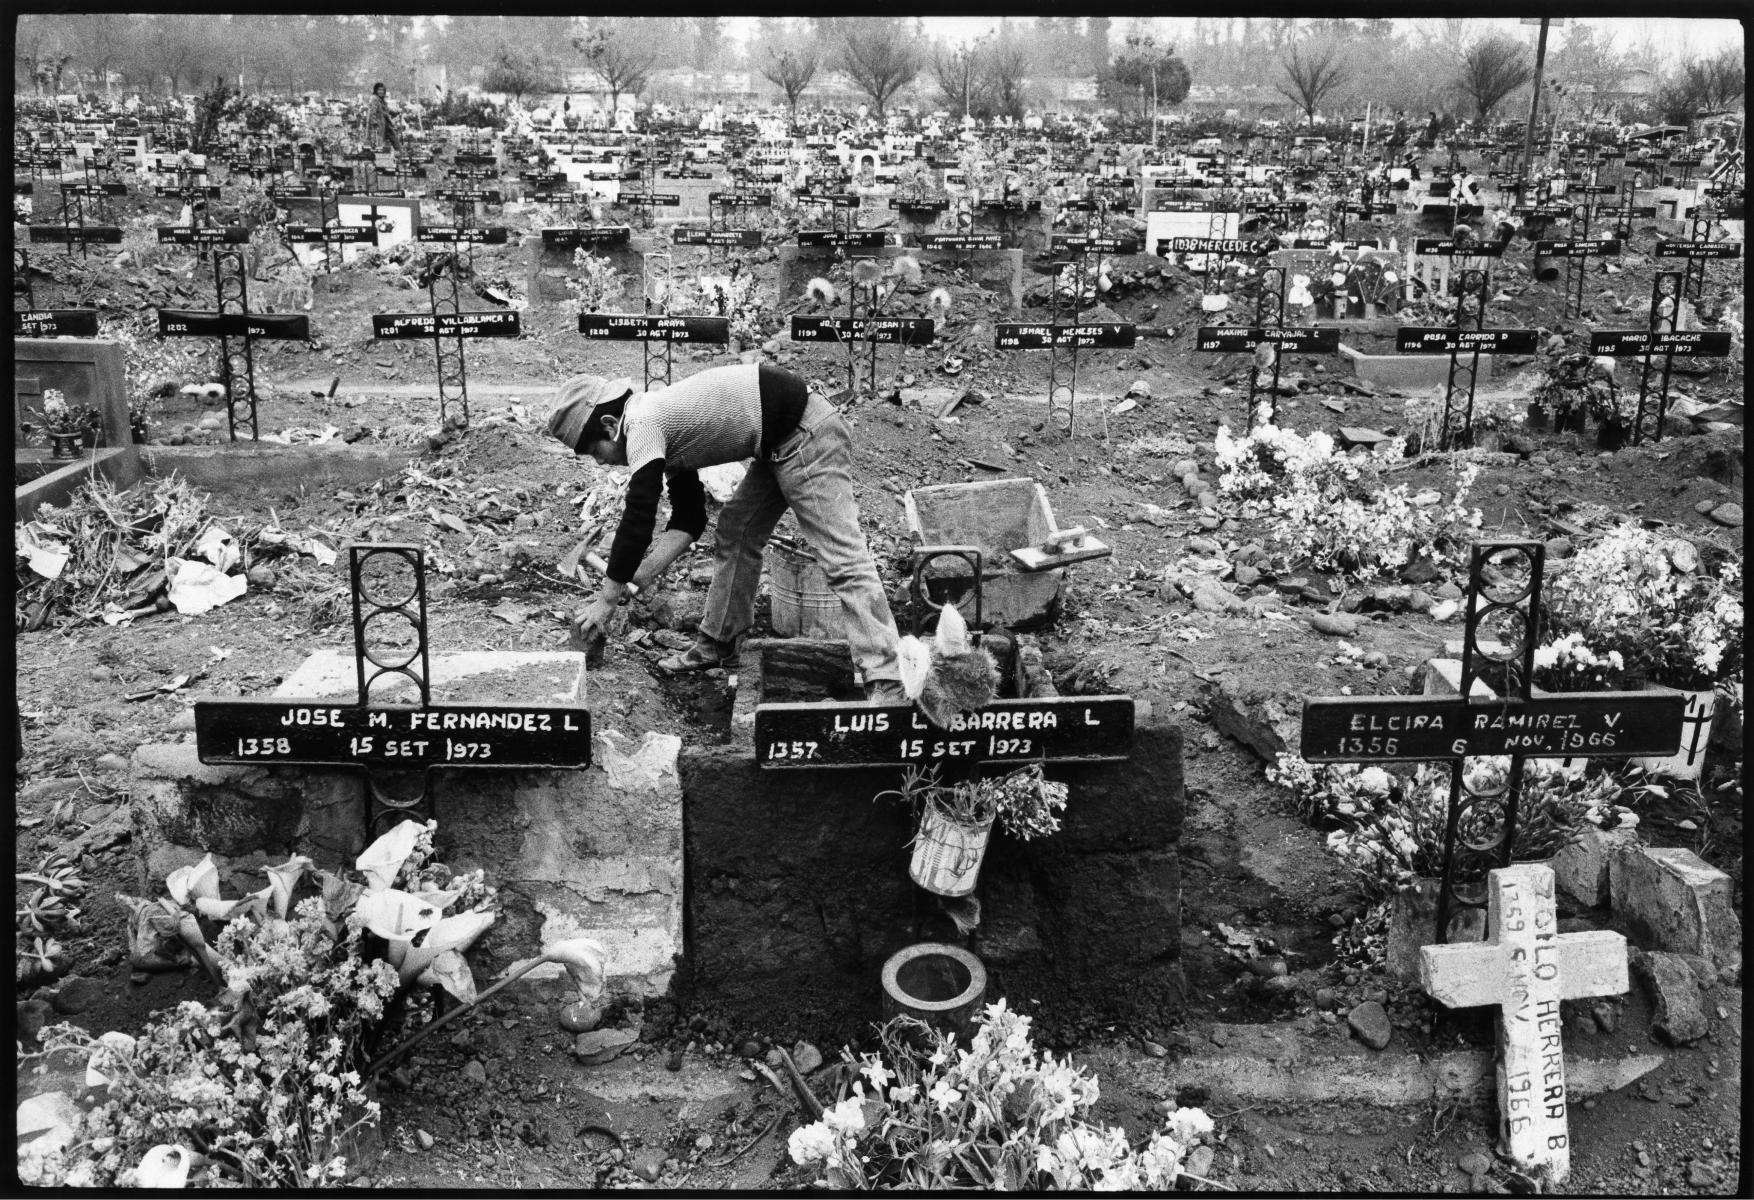 A Chilean cemetary during the days after the Coup  d'Etat  1973 : Looking Back: 60 Years of Photographs : David Burnett | Photographer